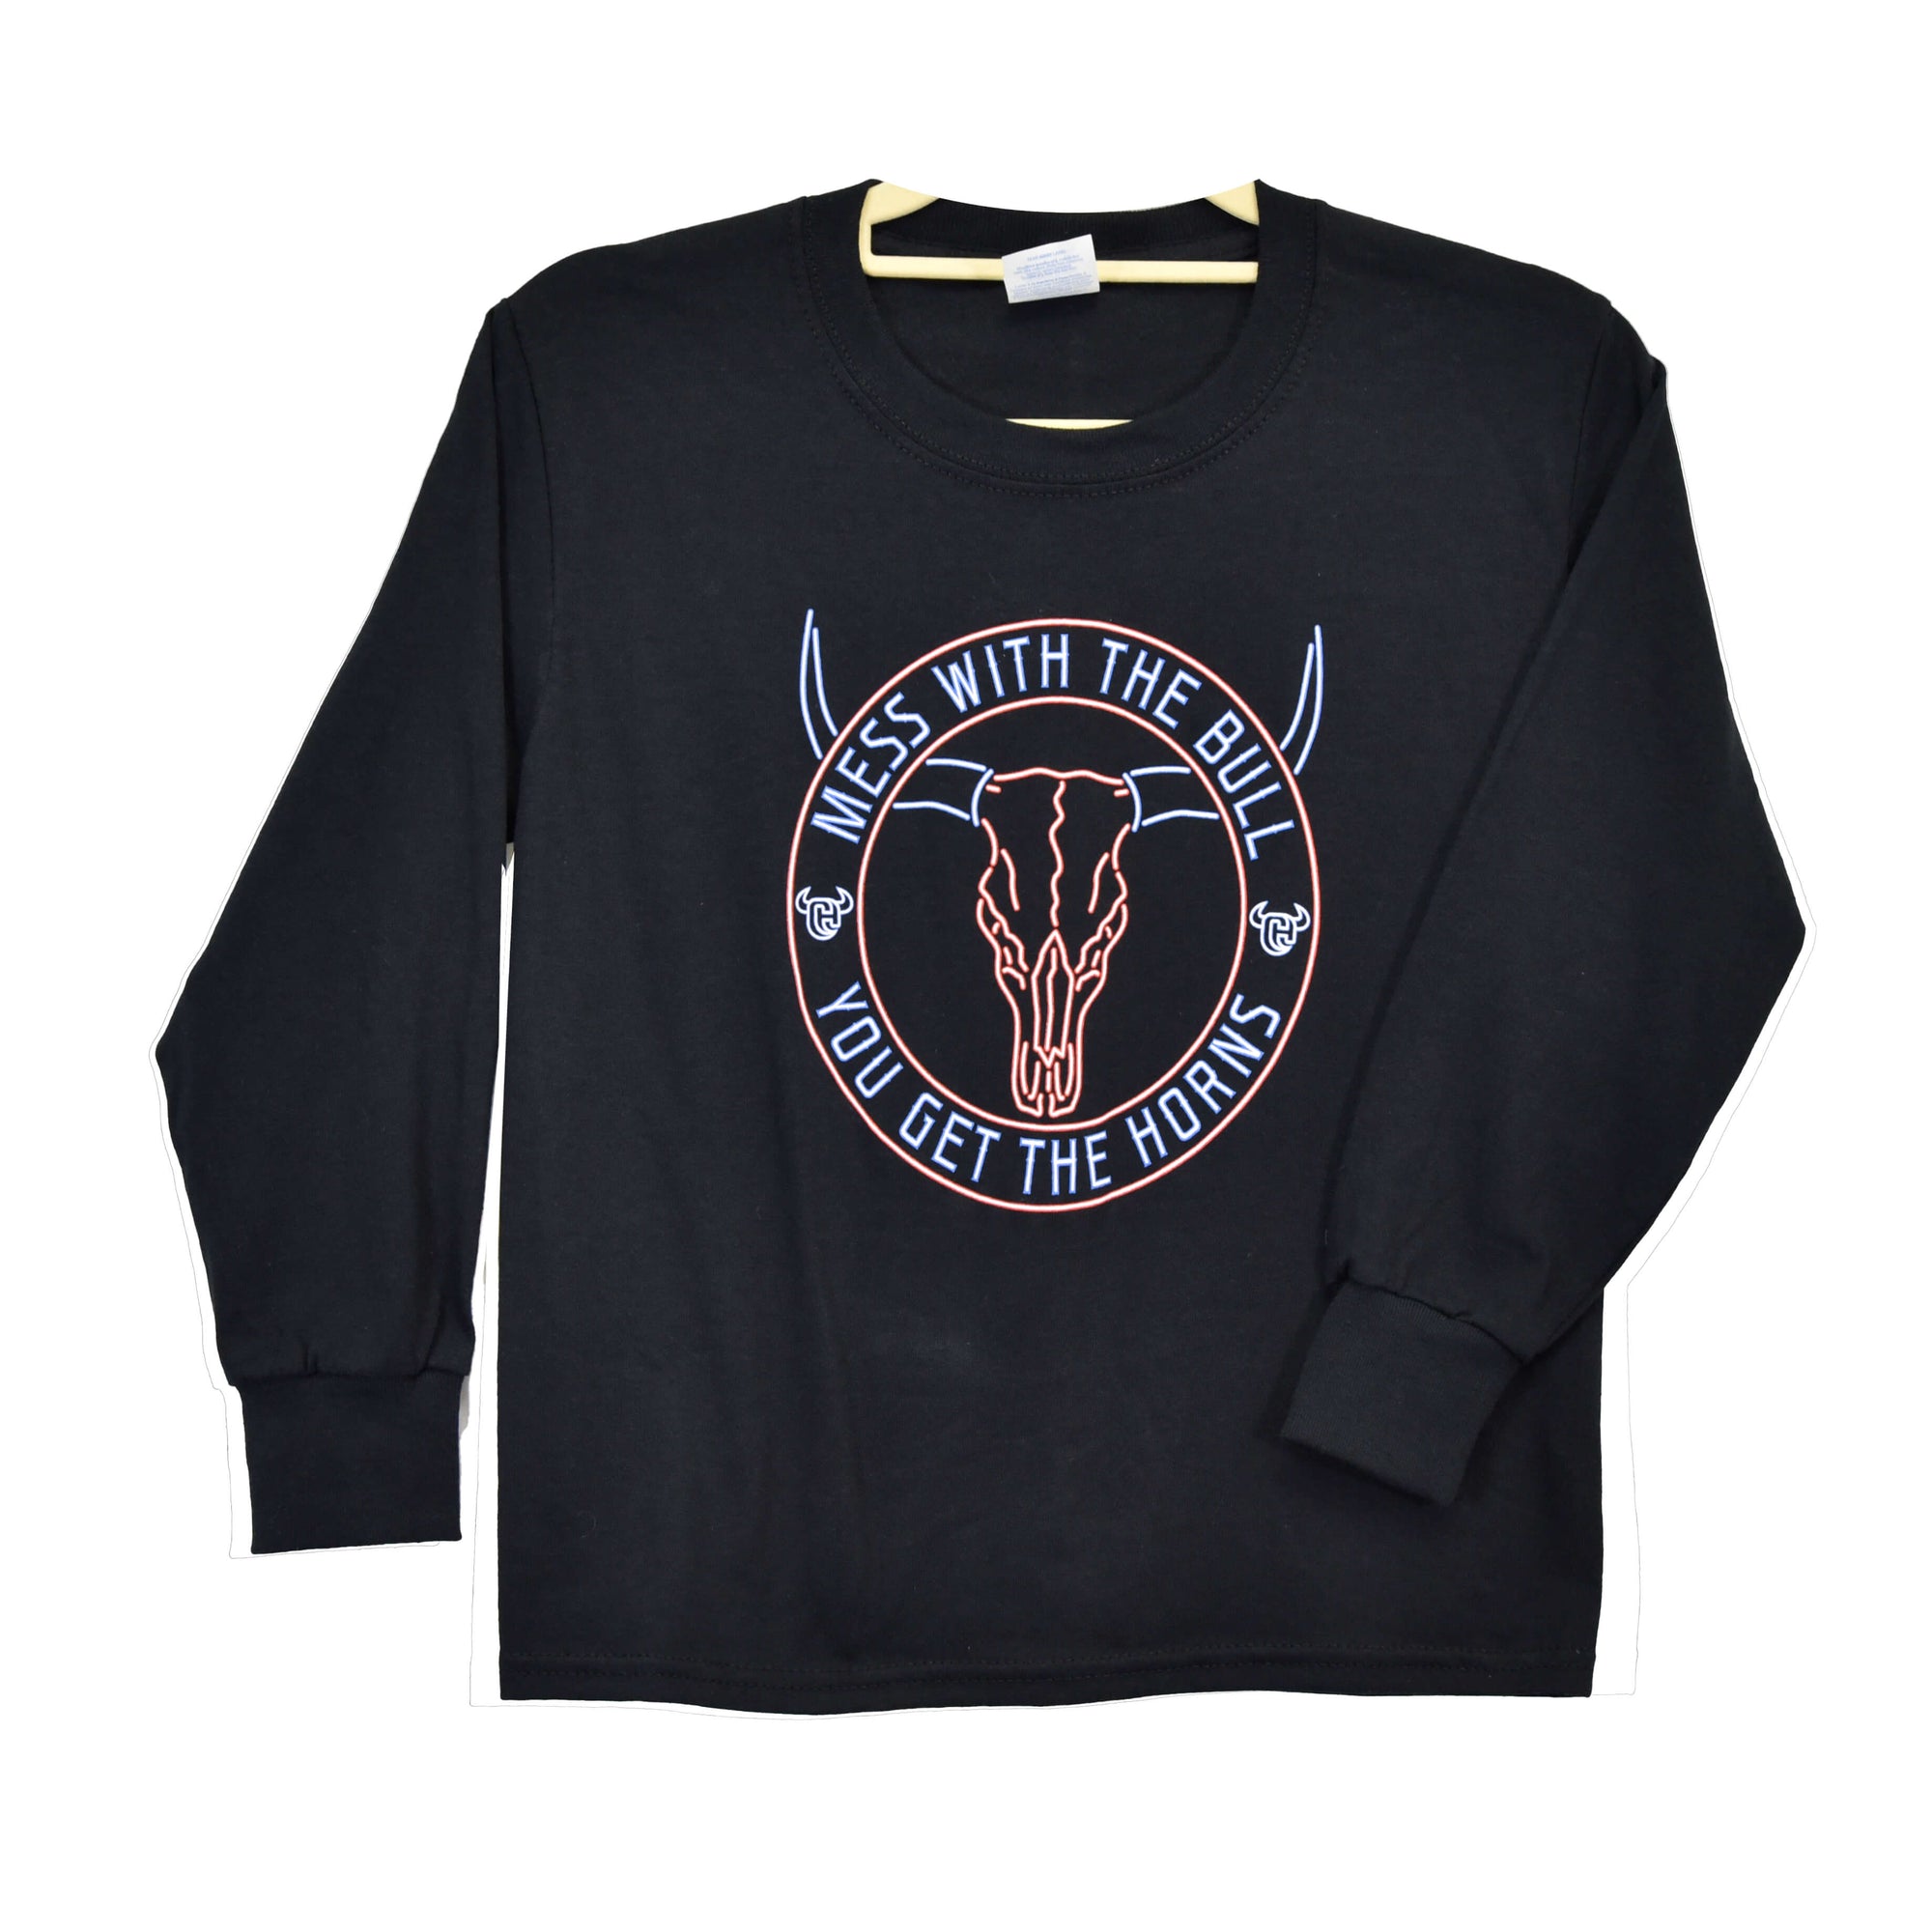 Boys Black Mess With The Bull Long Sleeve T-Shirt from Cowboy Hardware